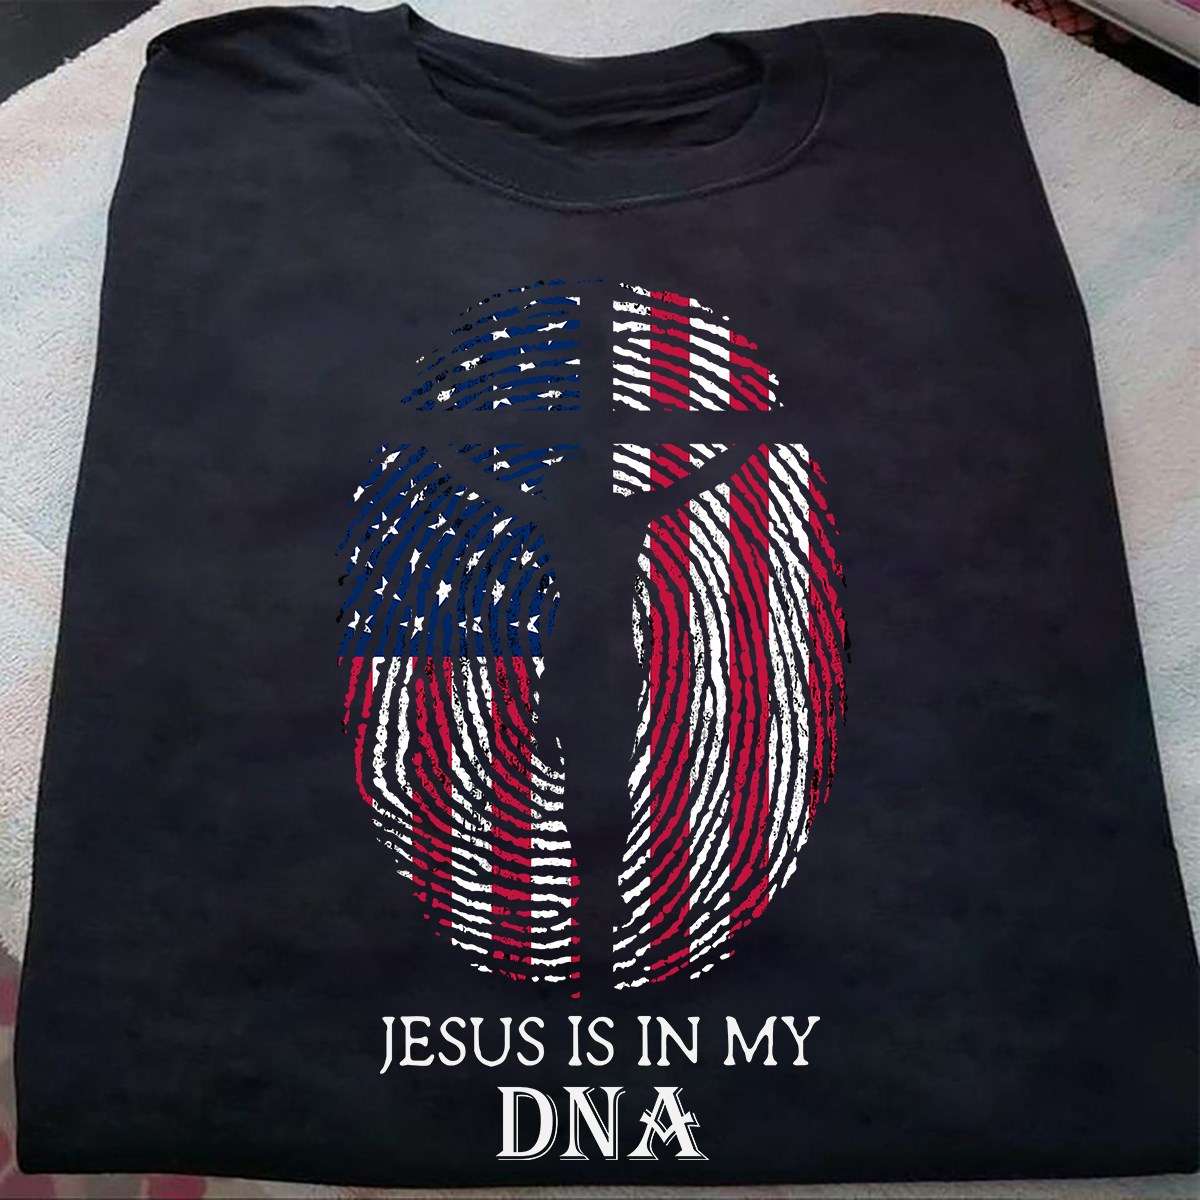 Jesus is in my DNA - America nation under god, Jesus and American